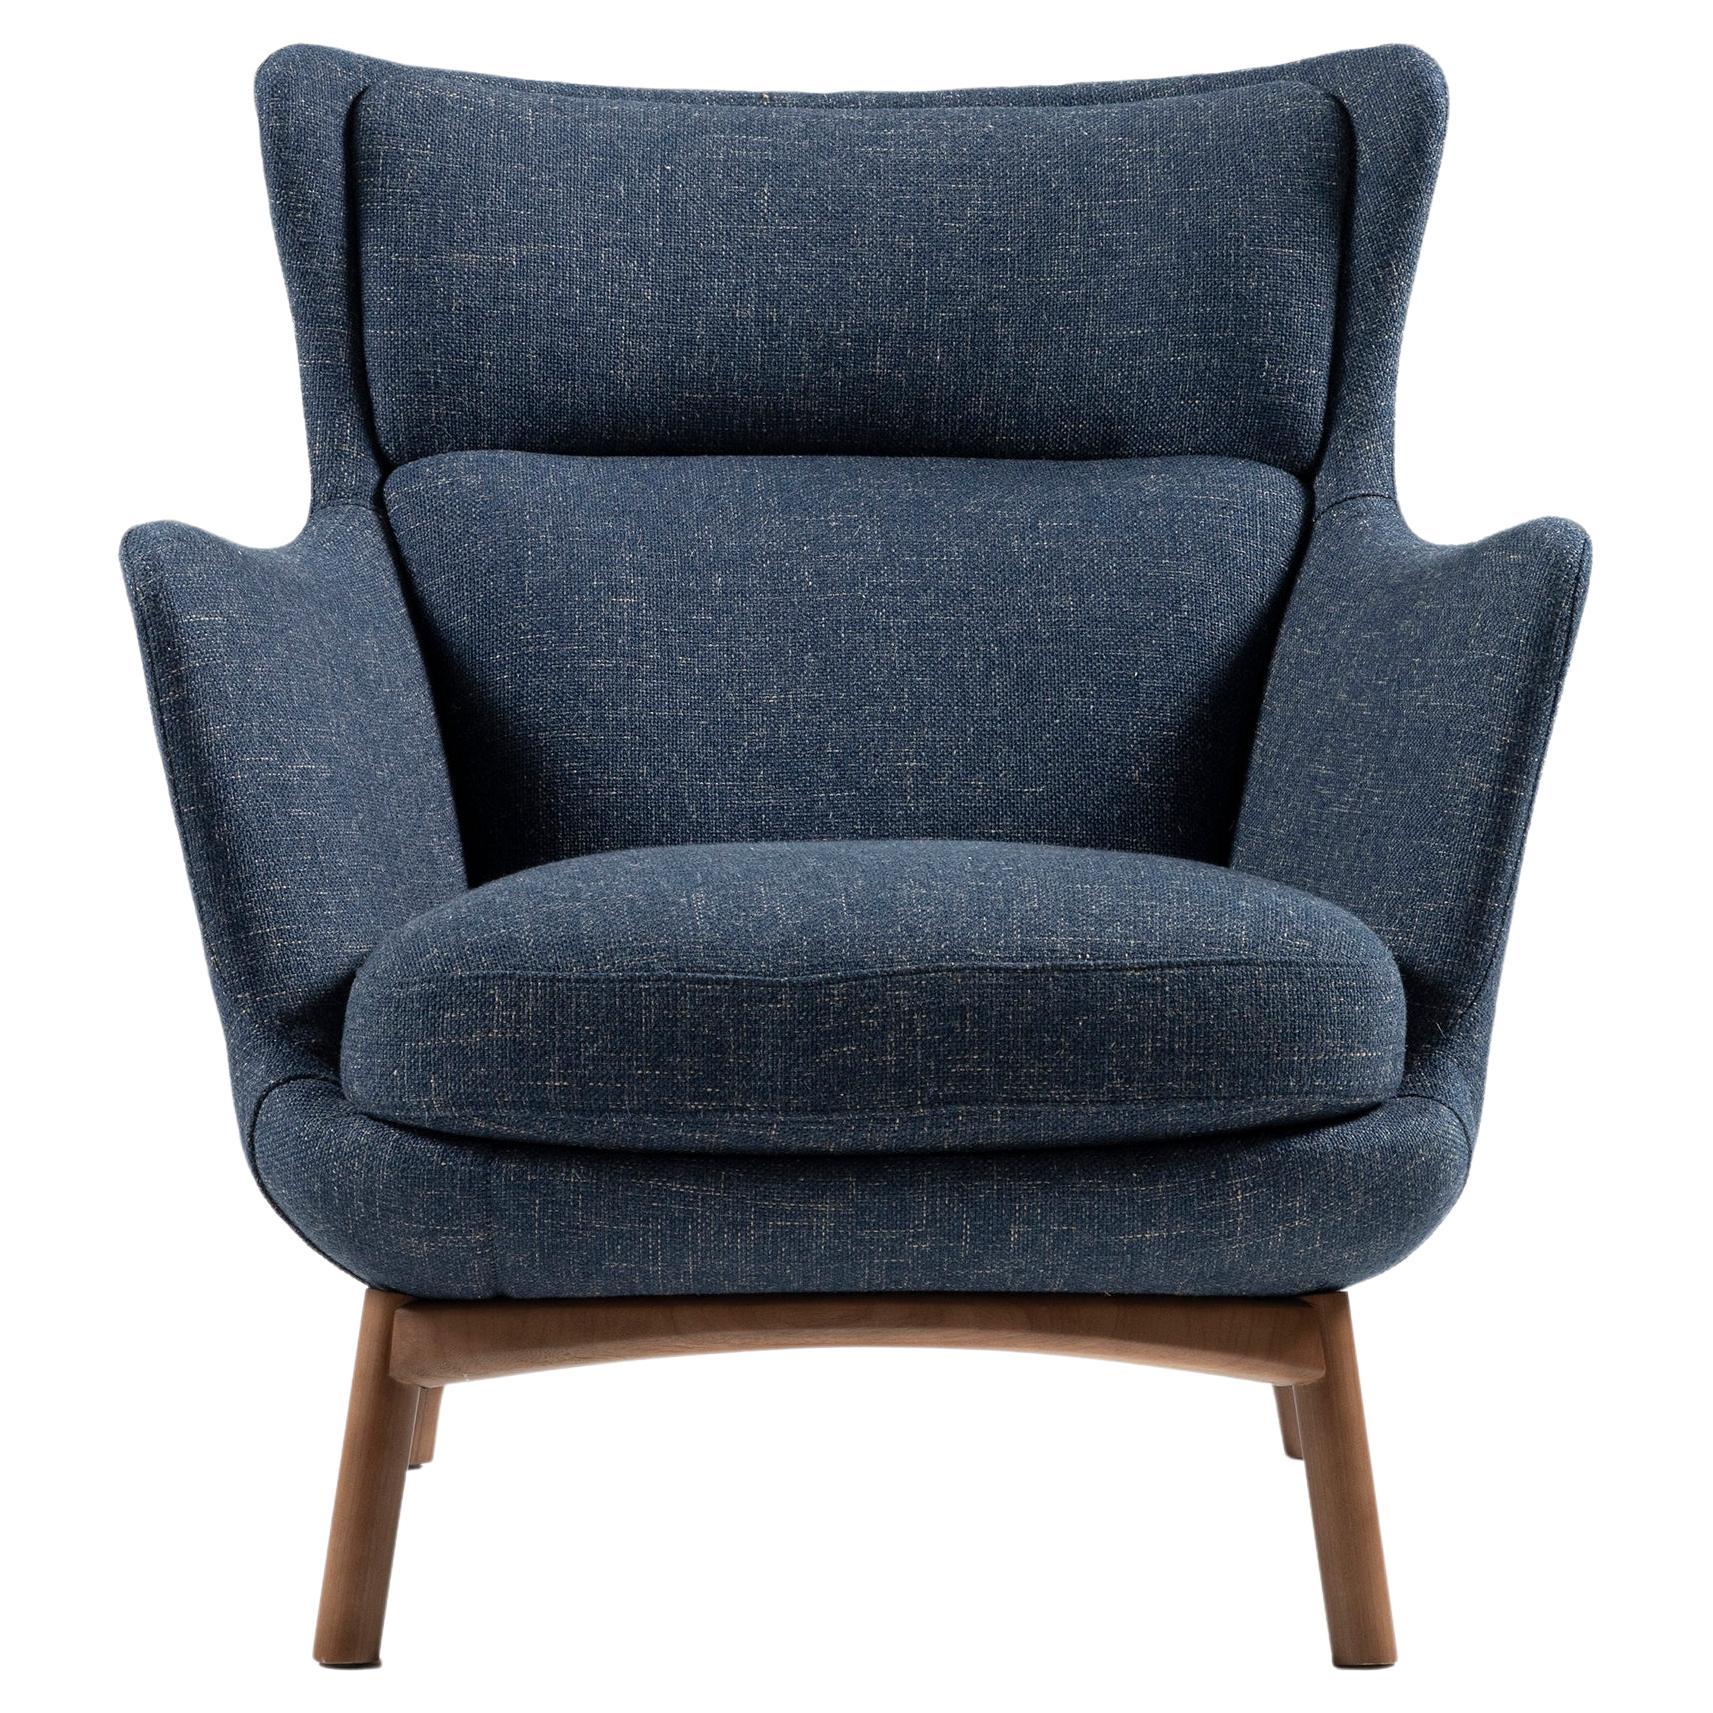 Sublime Armchairs, Contemporary Style in Solid Wood, Textiles Upholstery.  For Sale